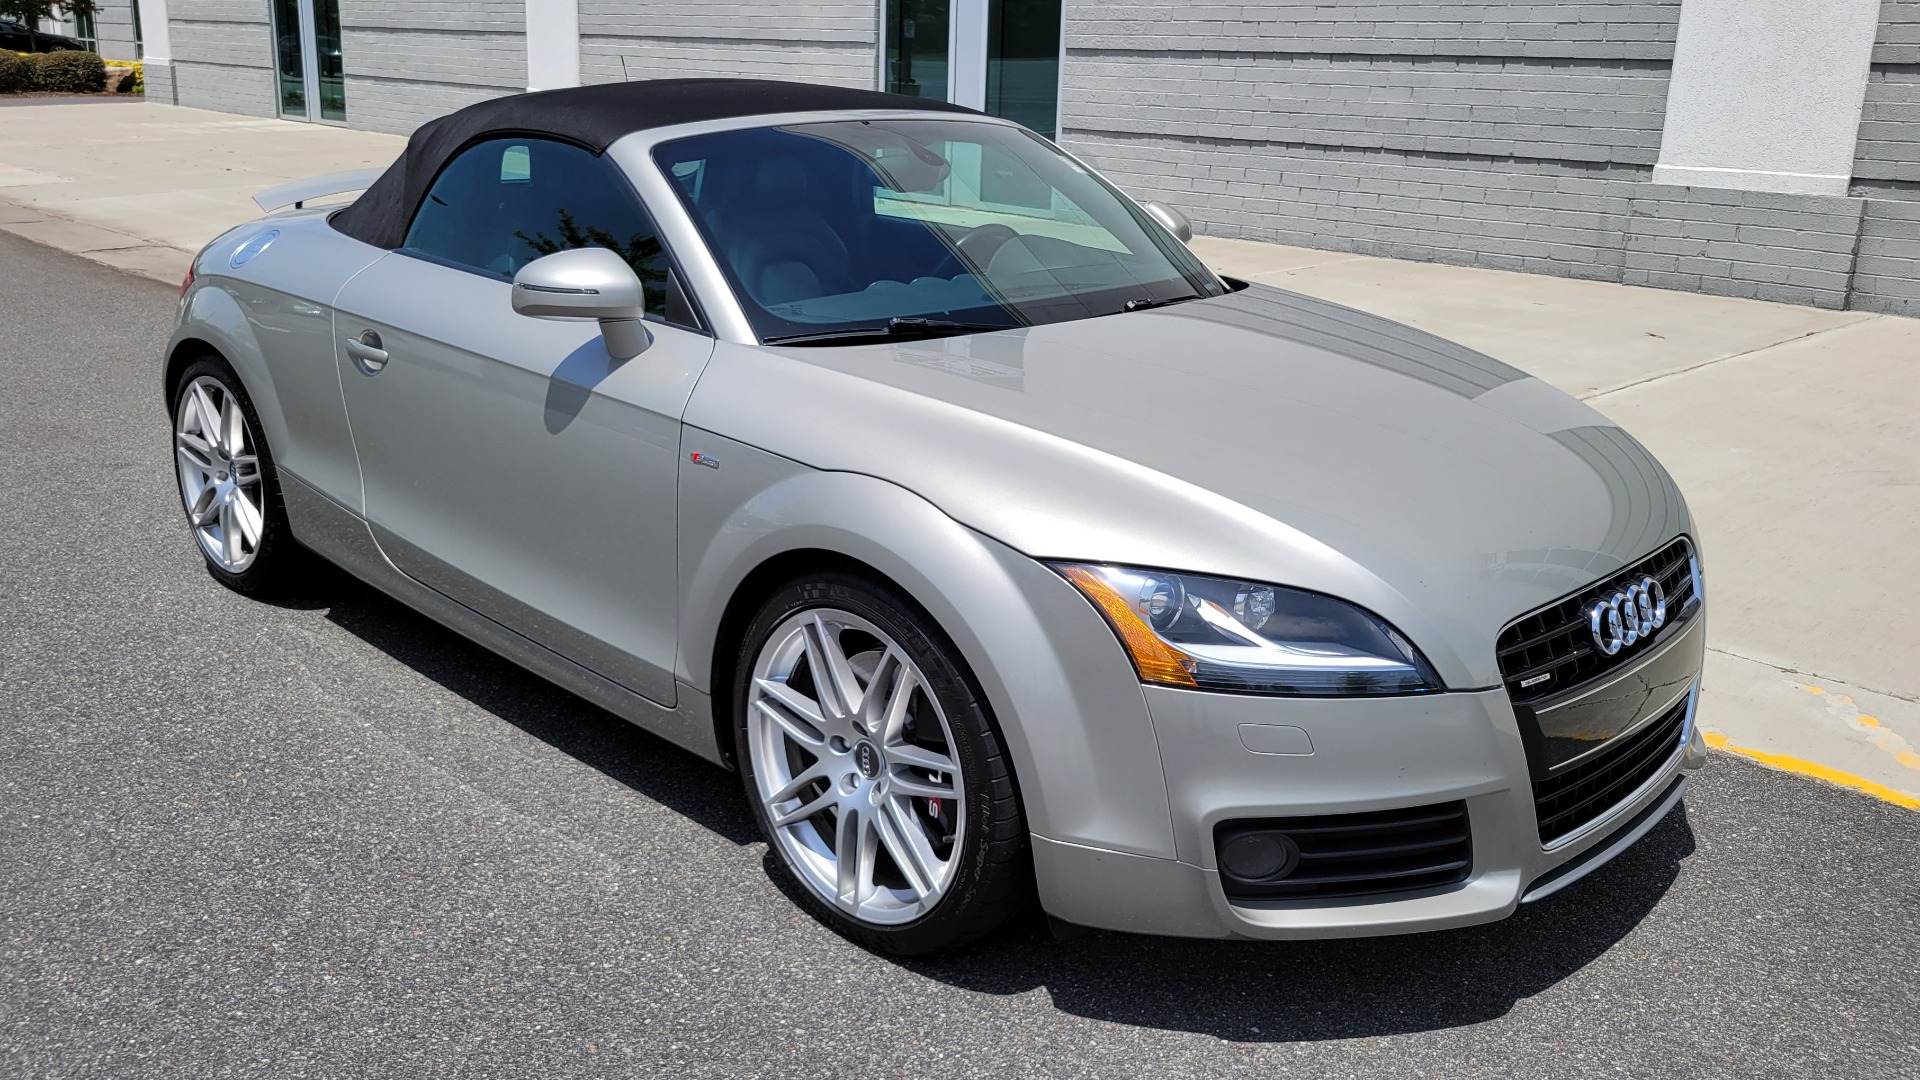 Used 2008 Audi TT 3.2L CONVERTIBLE / MANUAL / 19IN WHEELS / LOW MILES for sale Sold at Formula Imports in Charlotte NC 28227 7